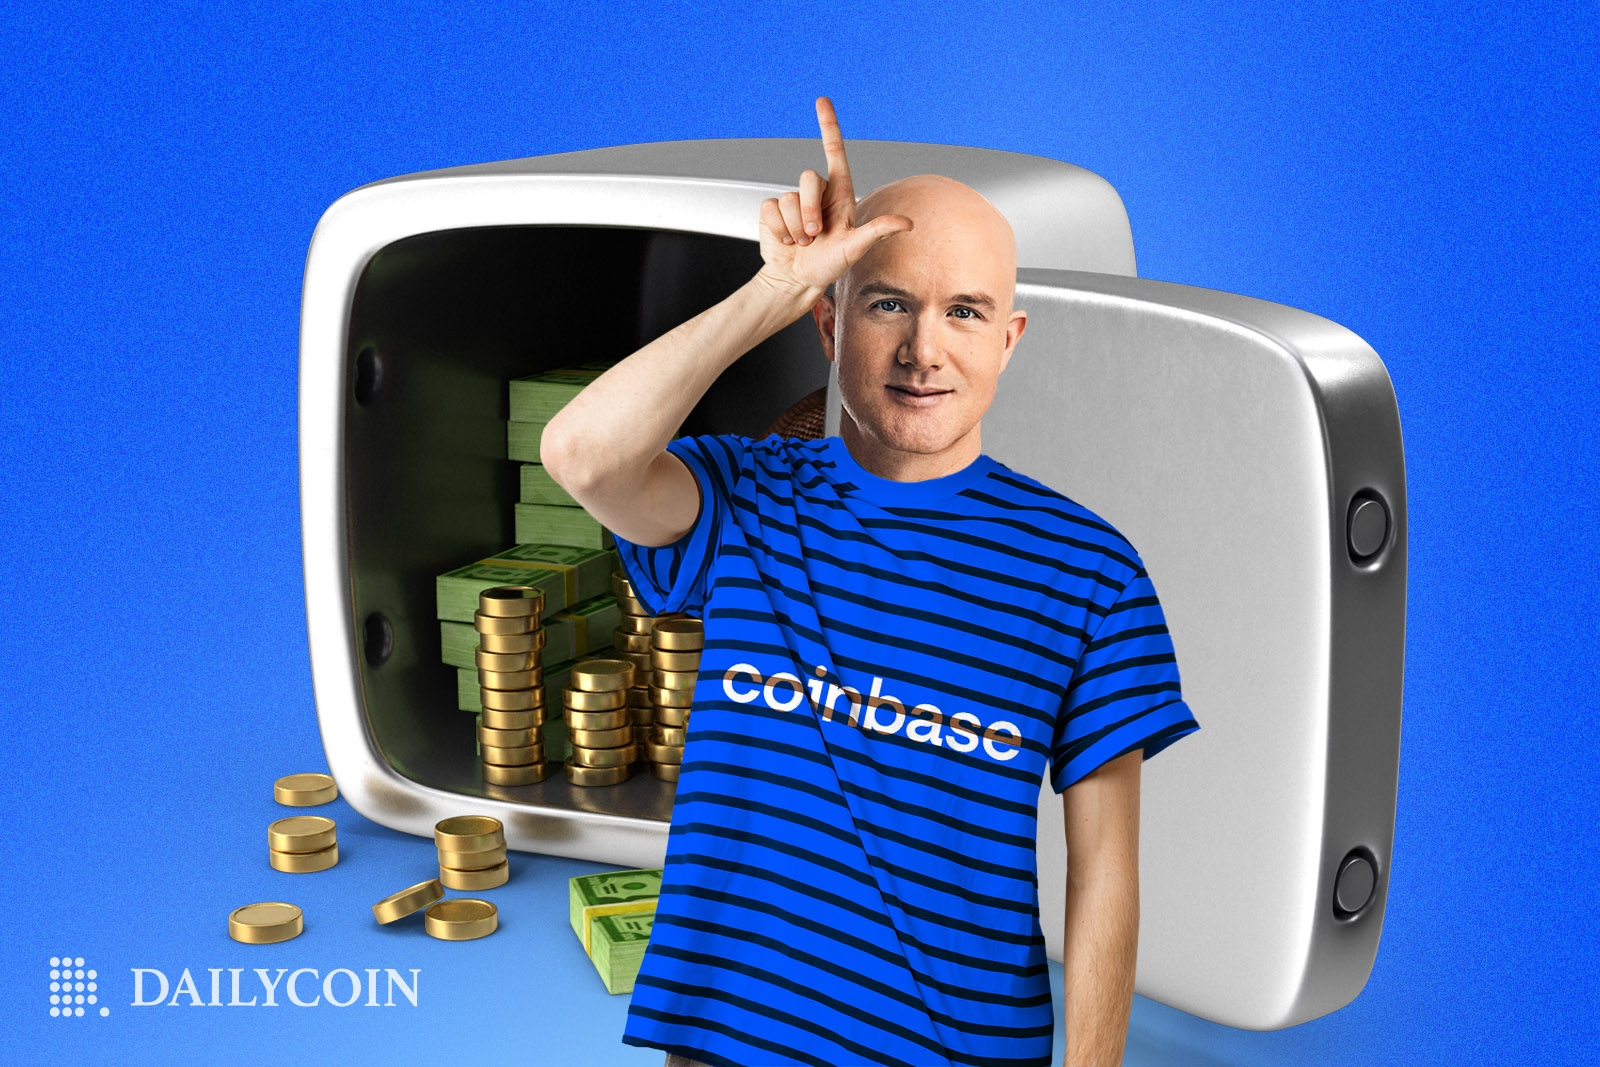 CEO of Coinbase Biran Armstrong doing a "loser" hand gesture in front of a safe full of cash.